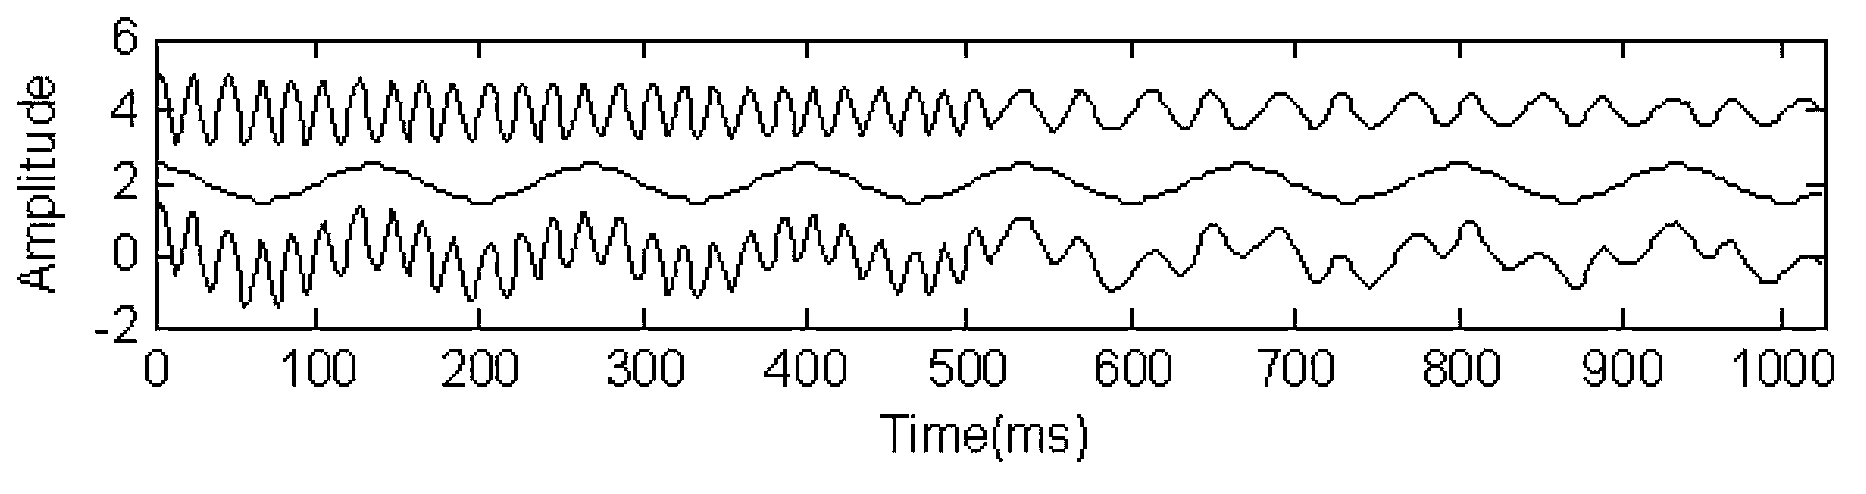 High-precision time-frequency analysis method